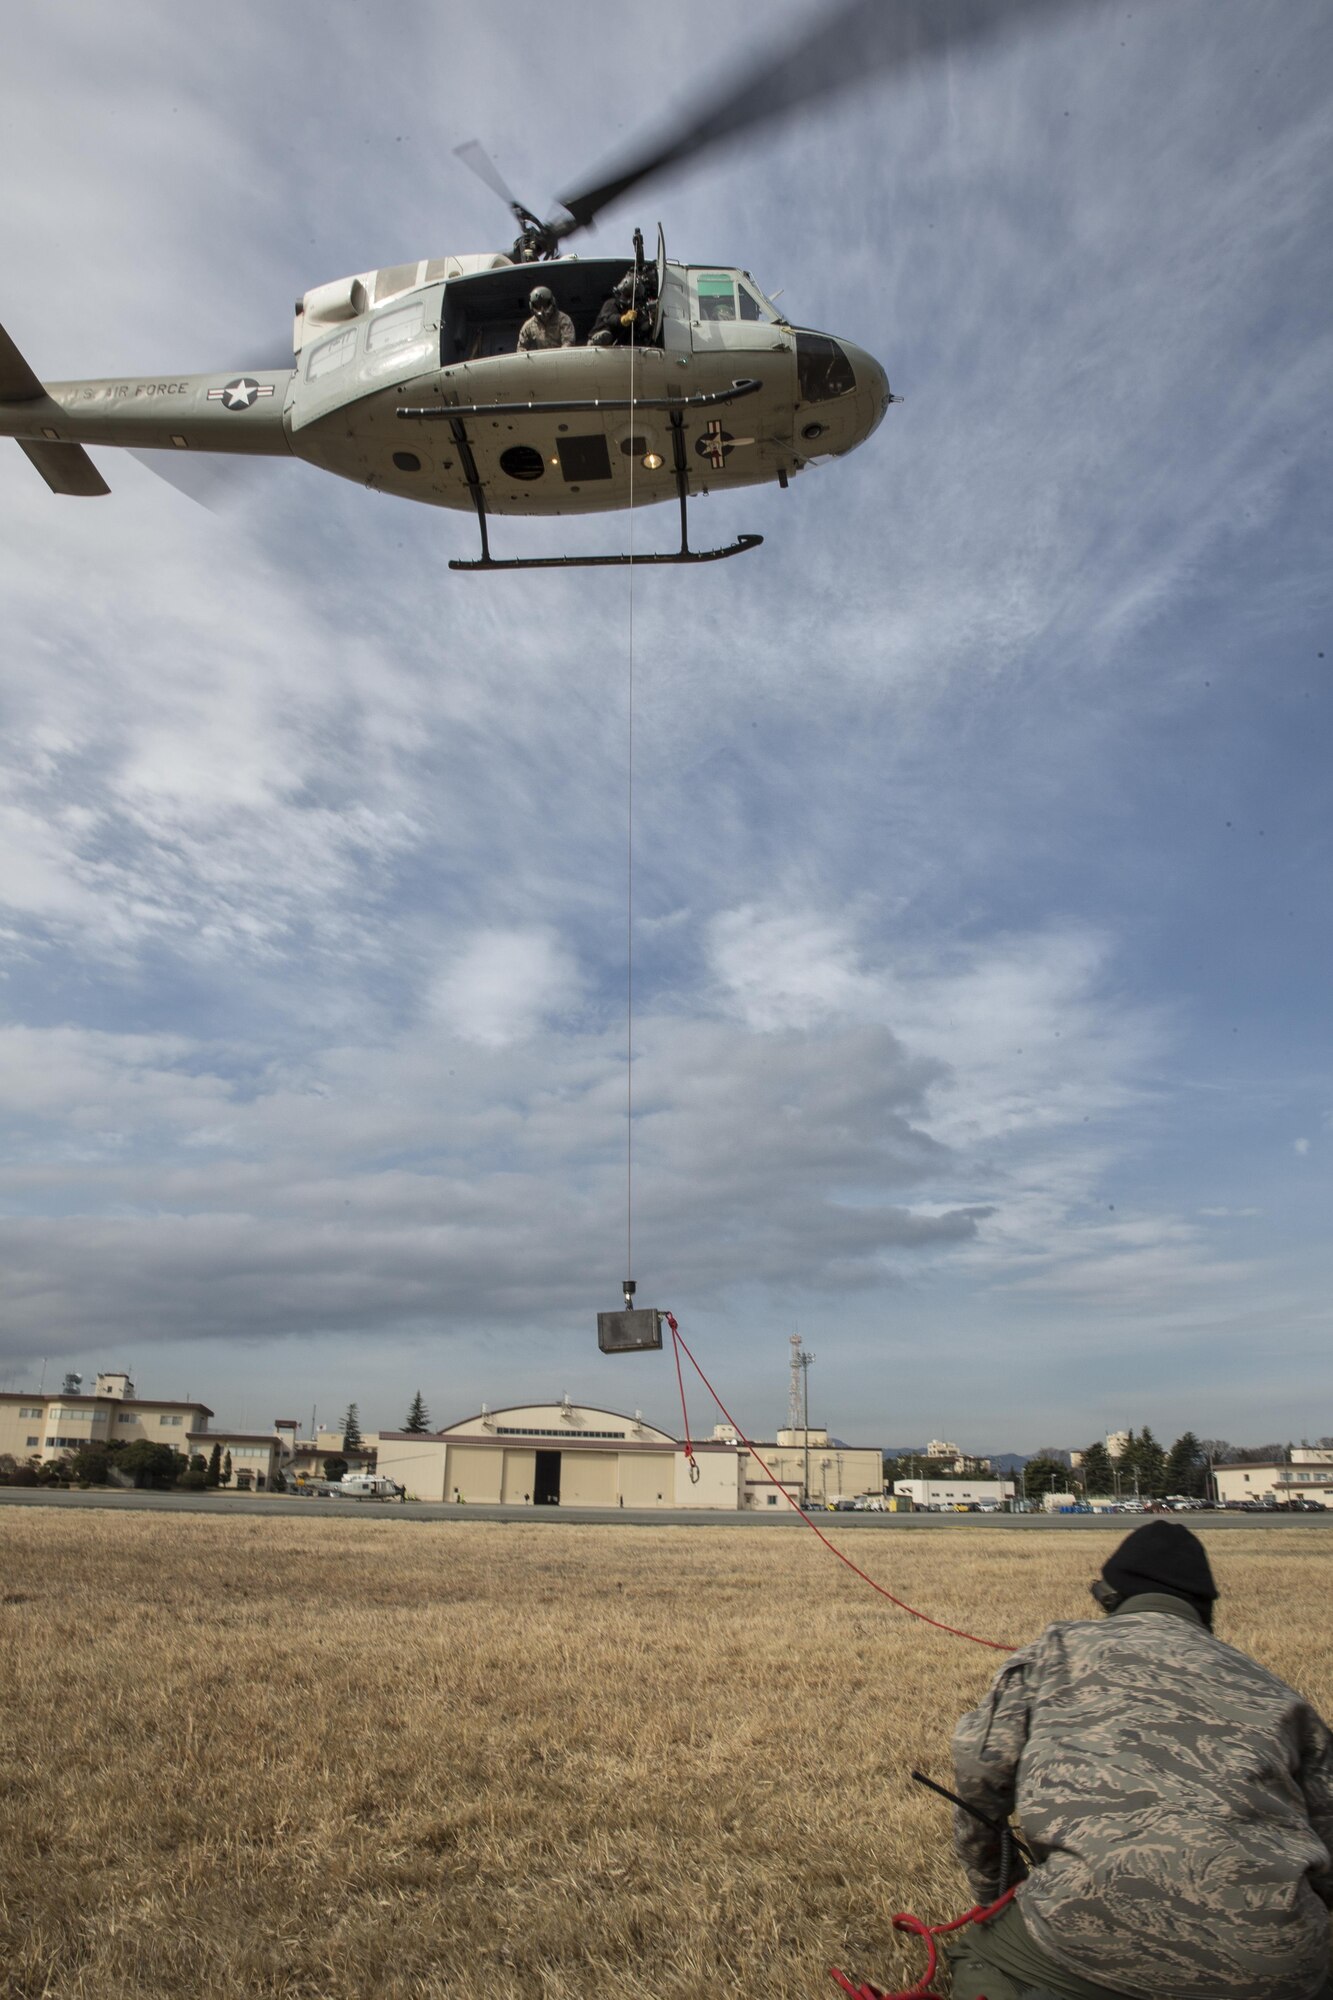 Members of the 459th Airlift Squadron perform hoist weight test at Yokota Air Base, Japan, Feb. 22, 2016. The 459th AS recently improved their search and rescue capabilities by outfitting two UH-1N Hueys with new rescue hoists. Previously, without the hoist, conducting rescues in small, tight areas wasn’t feasible. Now, 459th AS aircrew can conduct any type of search and rescue scenario throughout the Kanto Plains. (U.S. Air Force photo by Osakabe Yasuo/Released) 